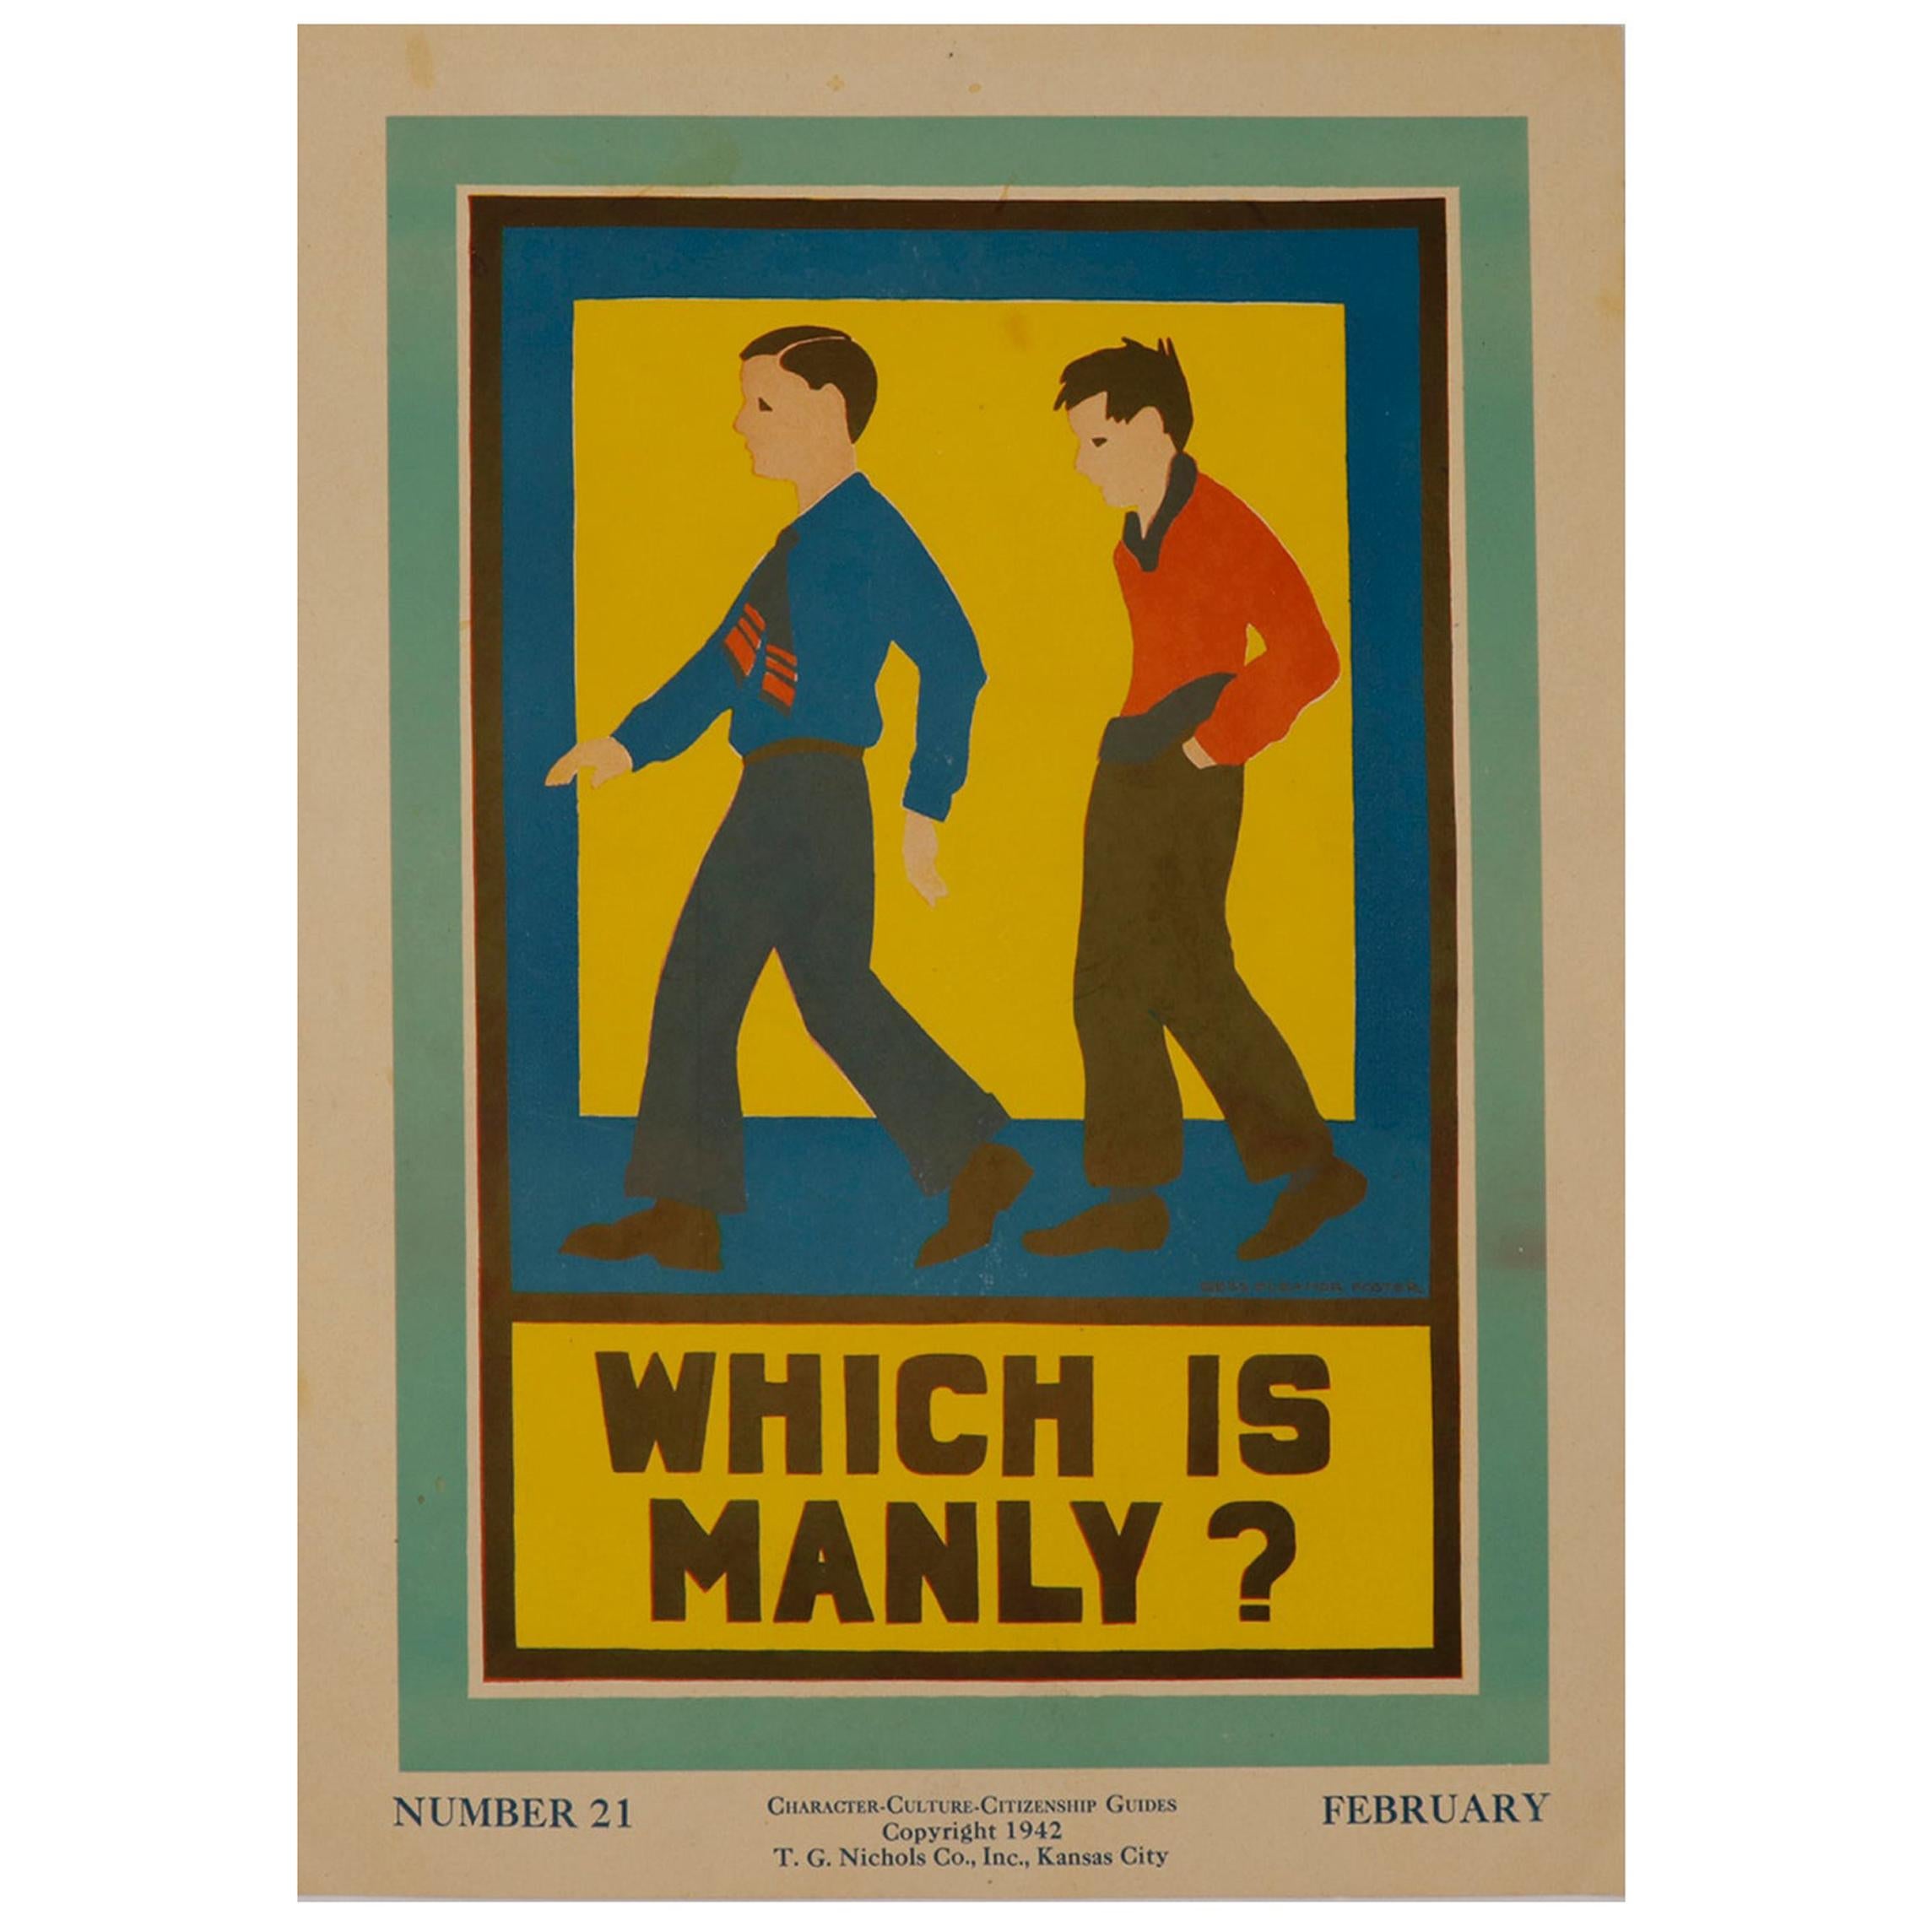 1930s Posters "Character, Culture and Citizenship Guides"